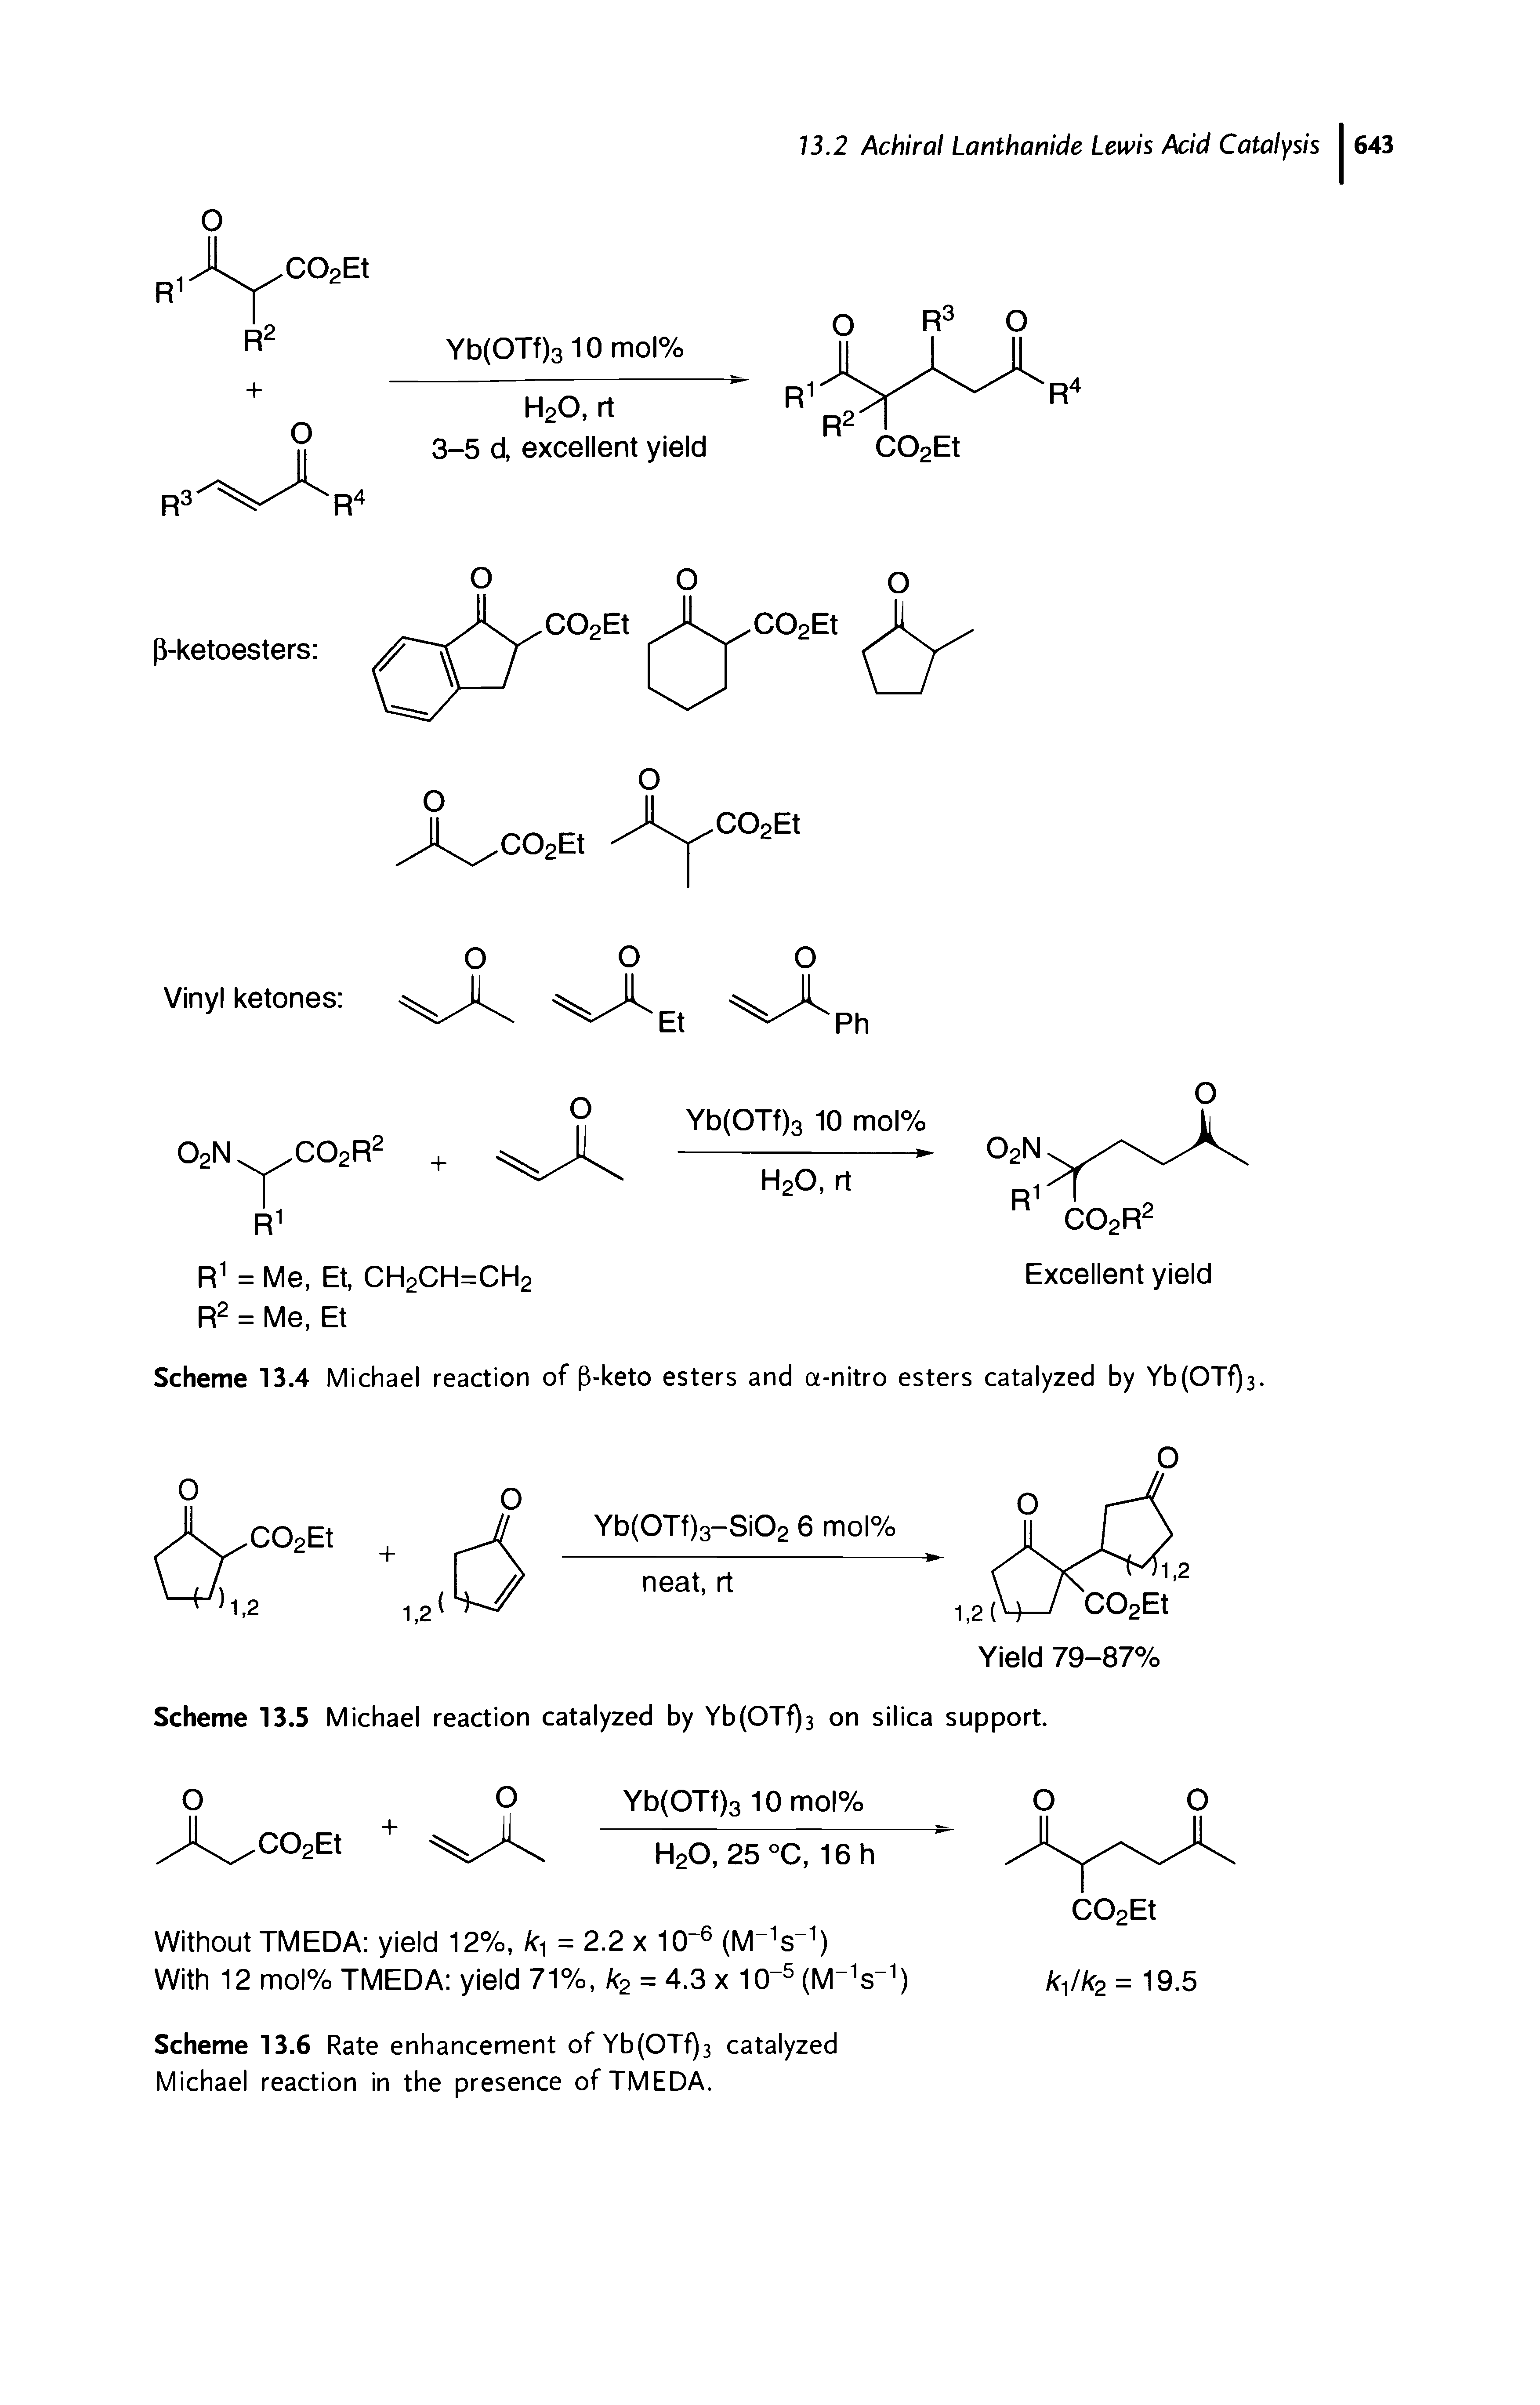 Scheme 13.5 Michael reaction catalyzed by Yb(OTf)3 on silica support.